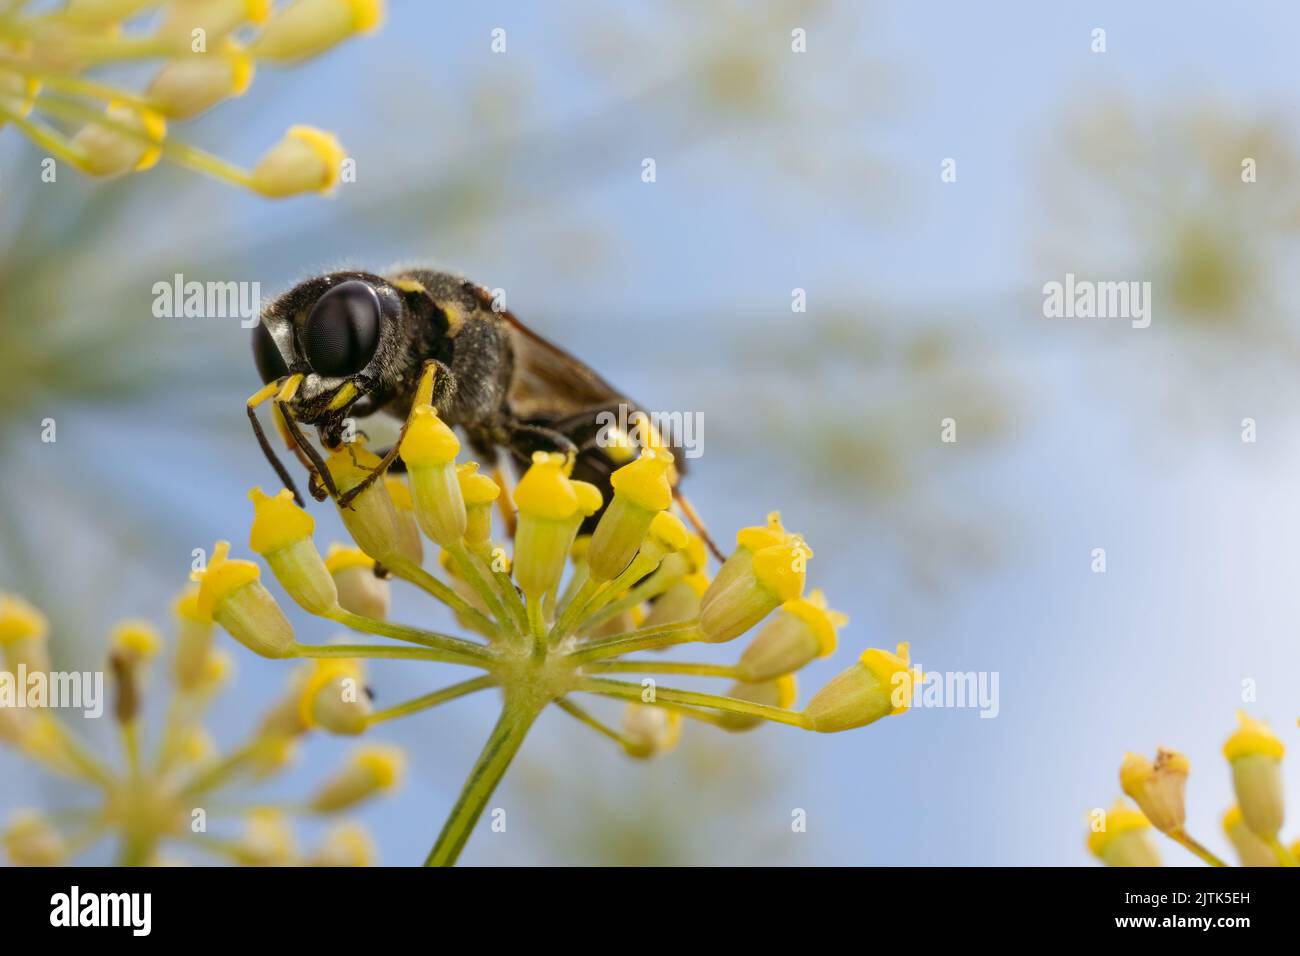 A digger wasp feeding on nectar of, and hunting amongst, flowers of a fennel plant in Kent, UK. Stock Photo